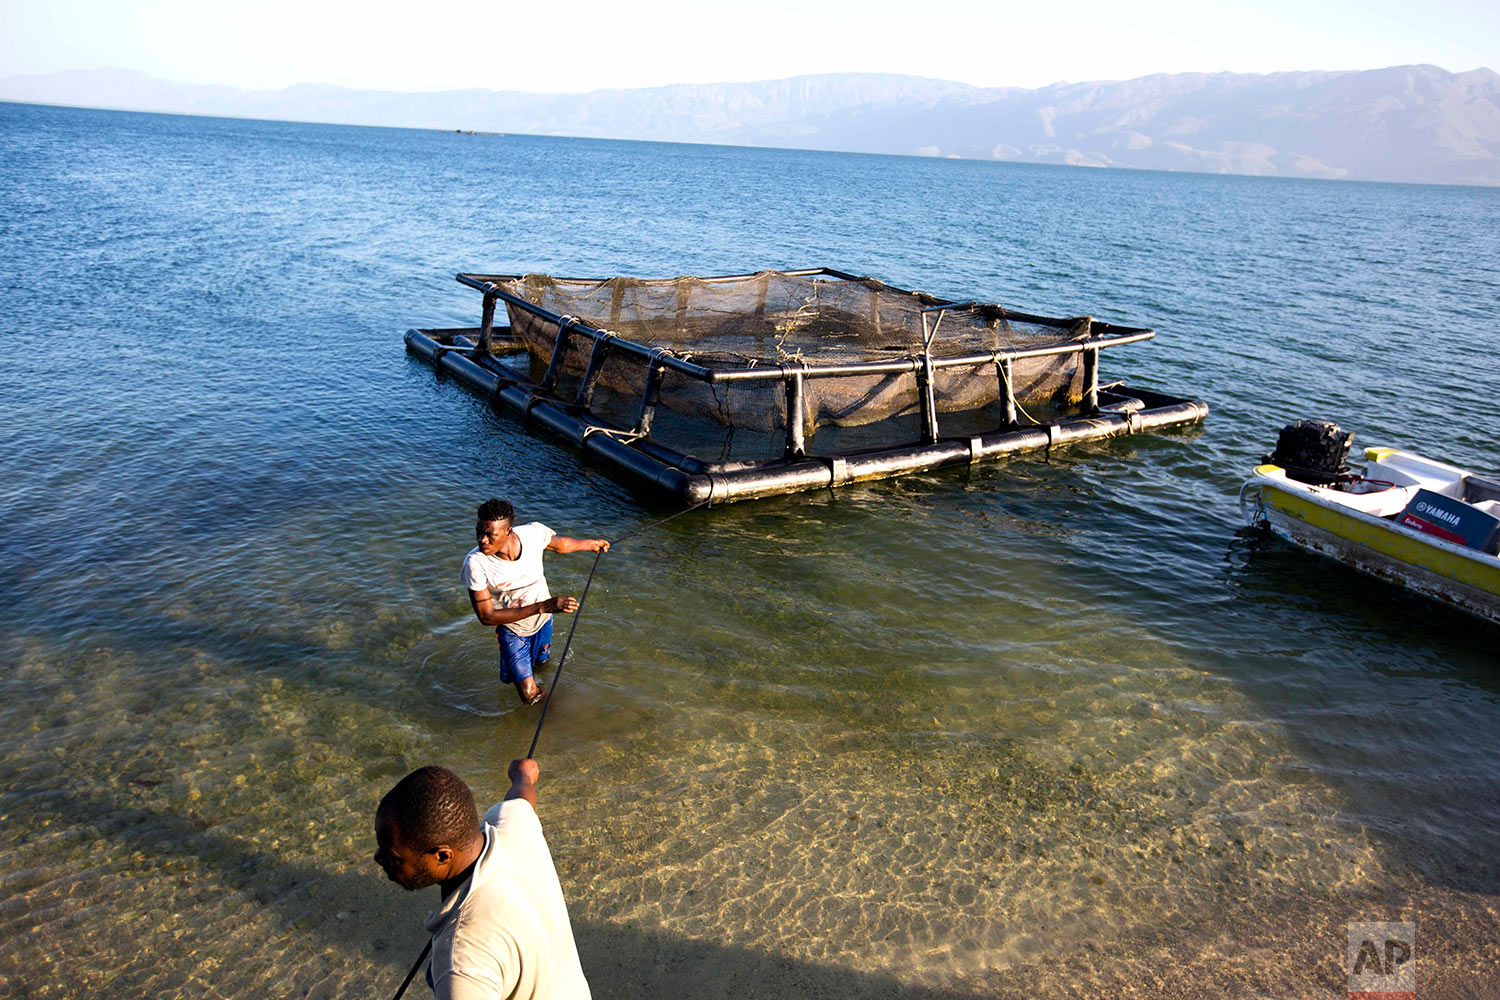  In this April 17, 2018 photo, Taino Aqua Fish farm workers pull in a cage of tilapia fish on Lake Azuei in Fond Parisien, Haiti. The small company started with 16 cages in 2014, building some out of PVC pipe and netting and repurposing others from T